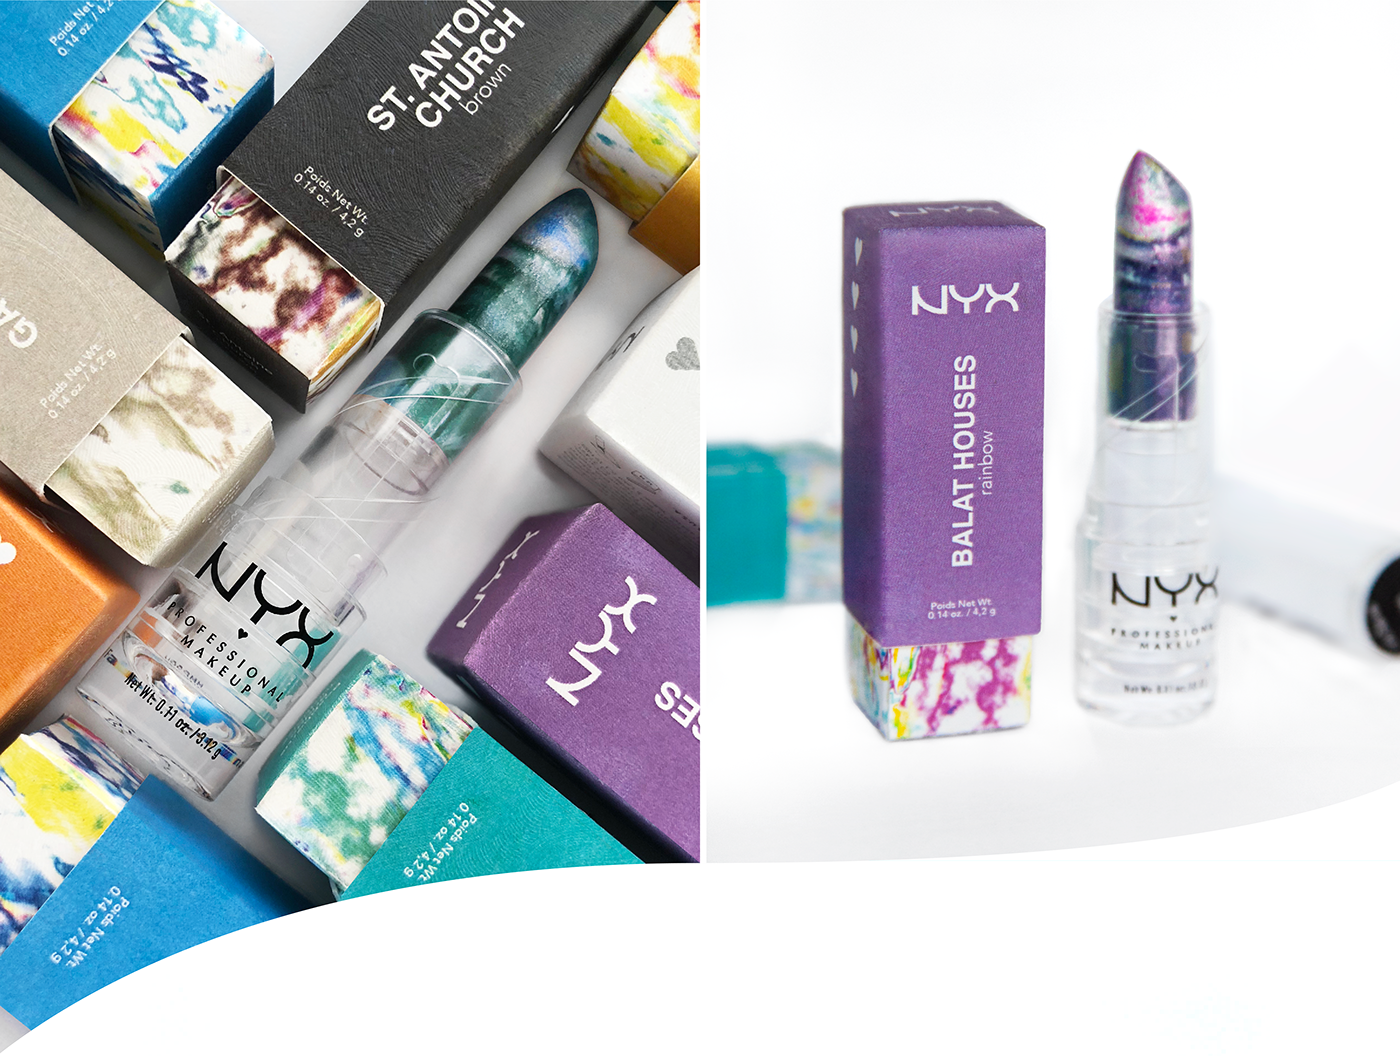 nyx lipstick nyxmakeup Marble lipstickseries Packaging packagindesign texture colorful eyecatchy